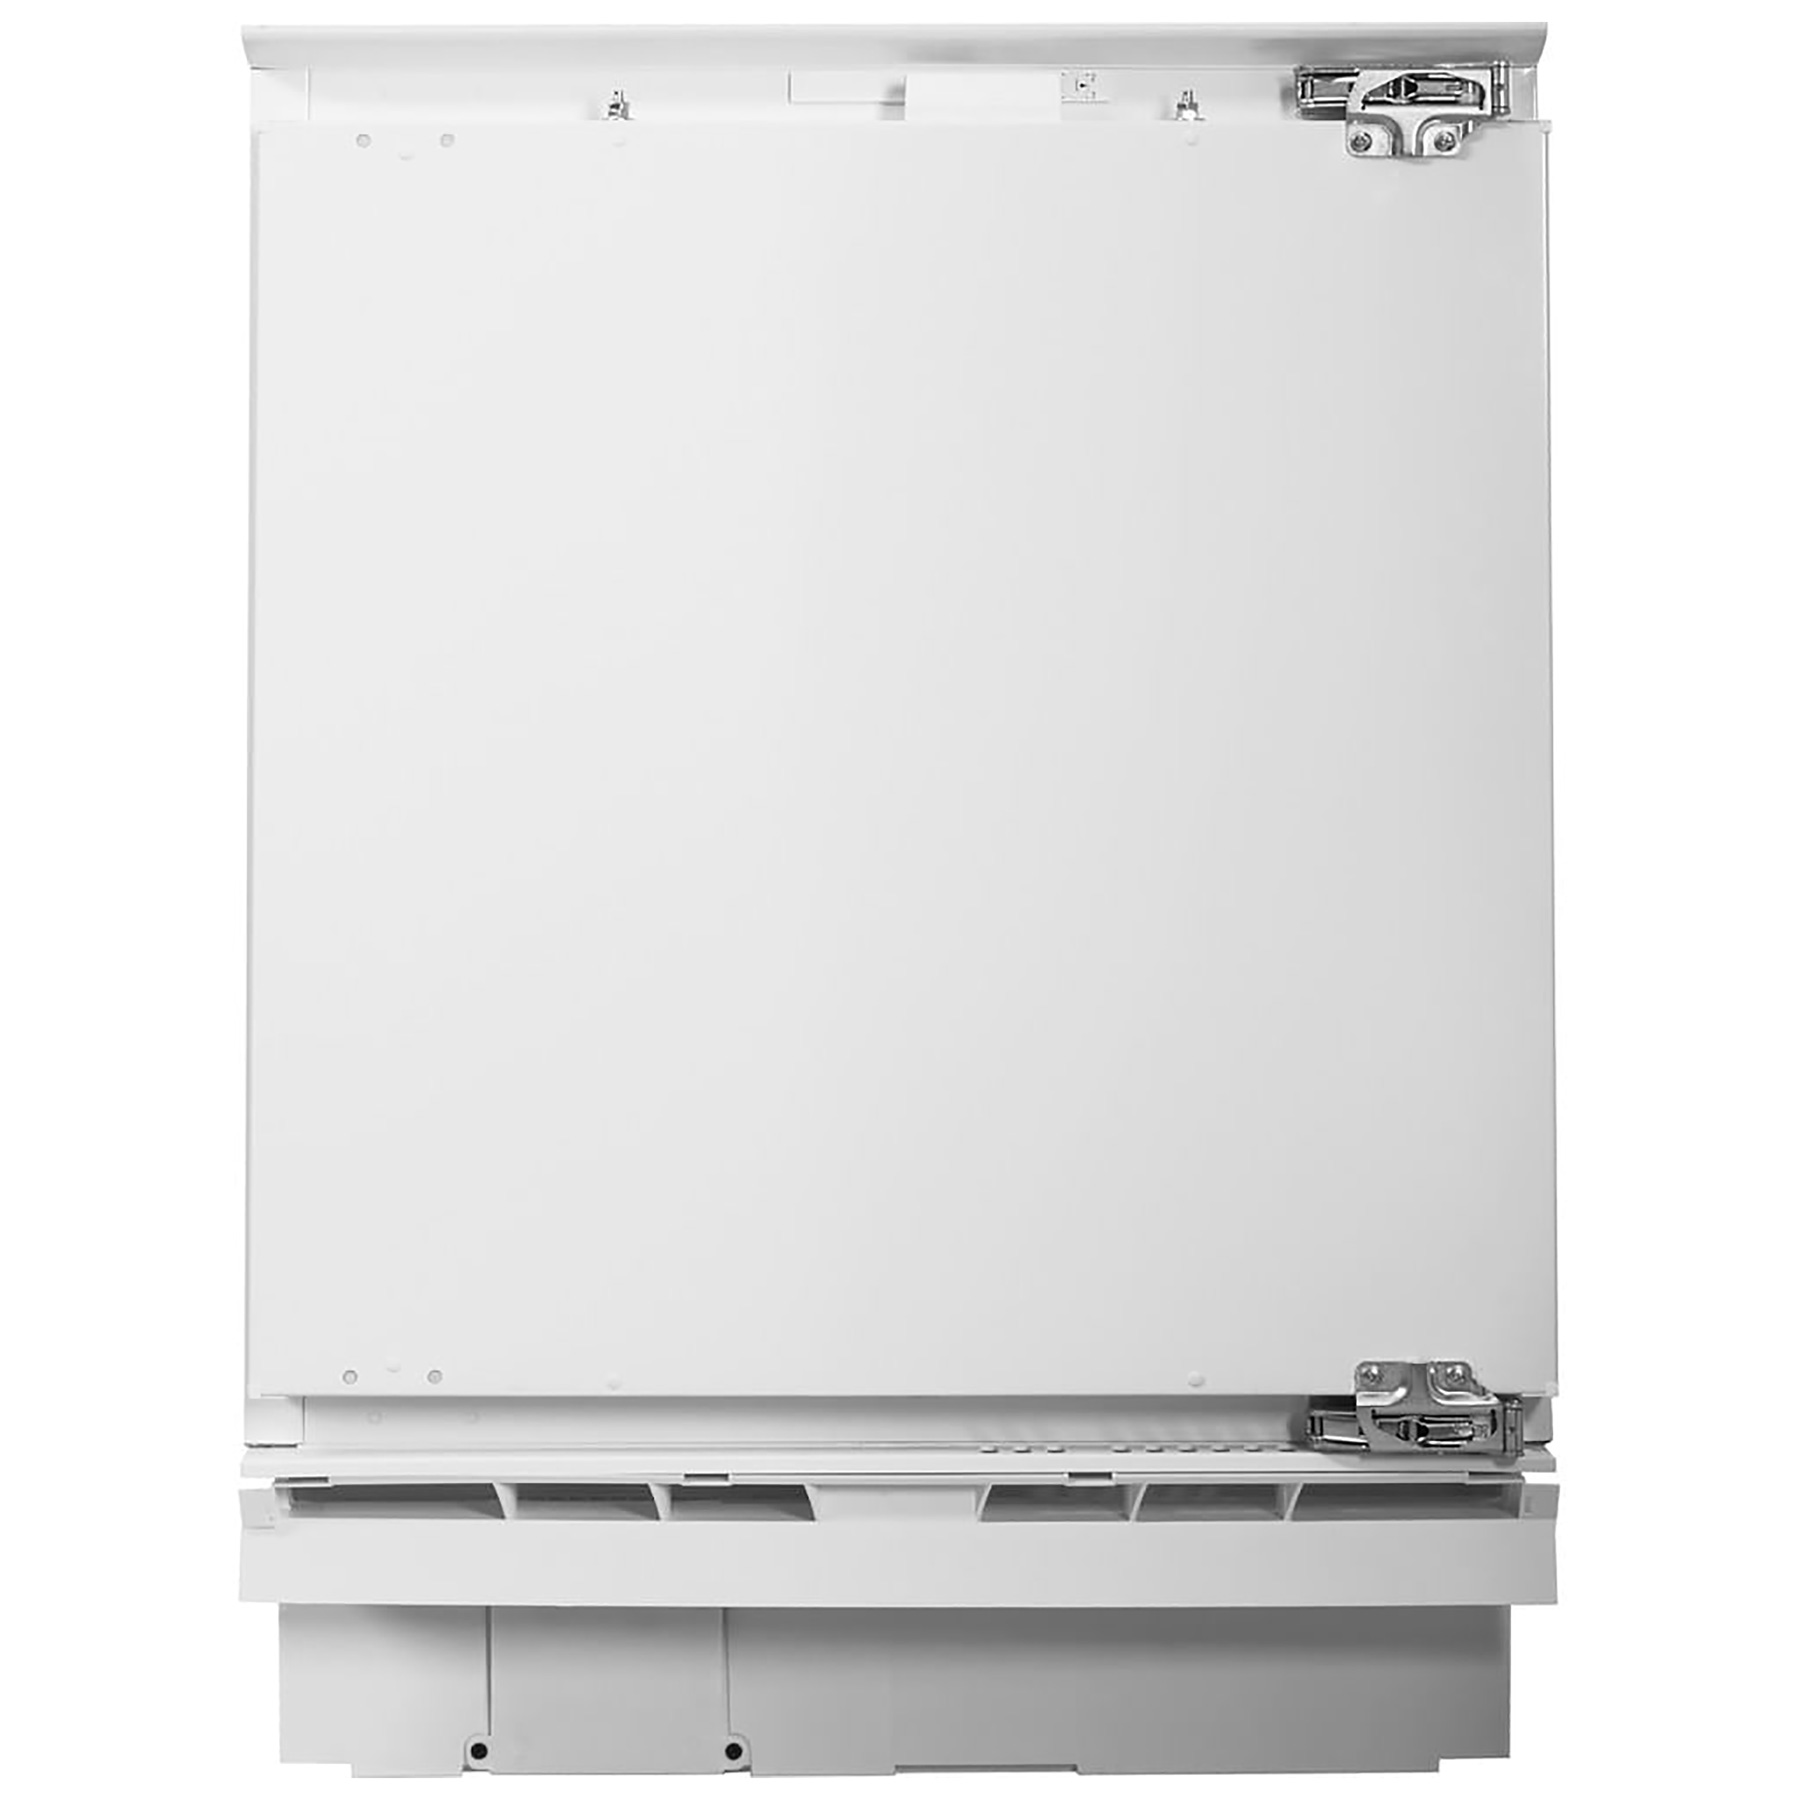 Image of Hotpoint HZA1UK1 60cm Built Under Counter Freezer in White F Rated 91L